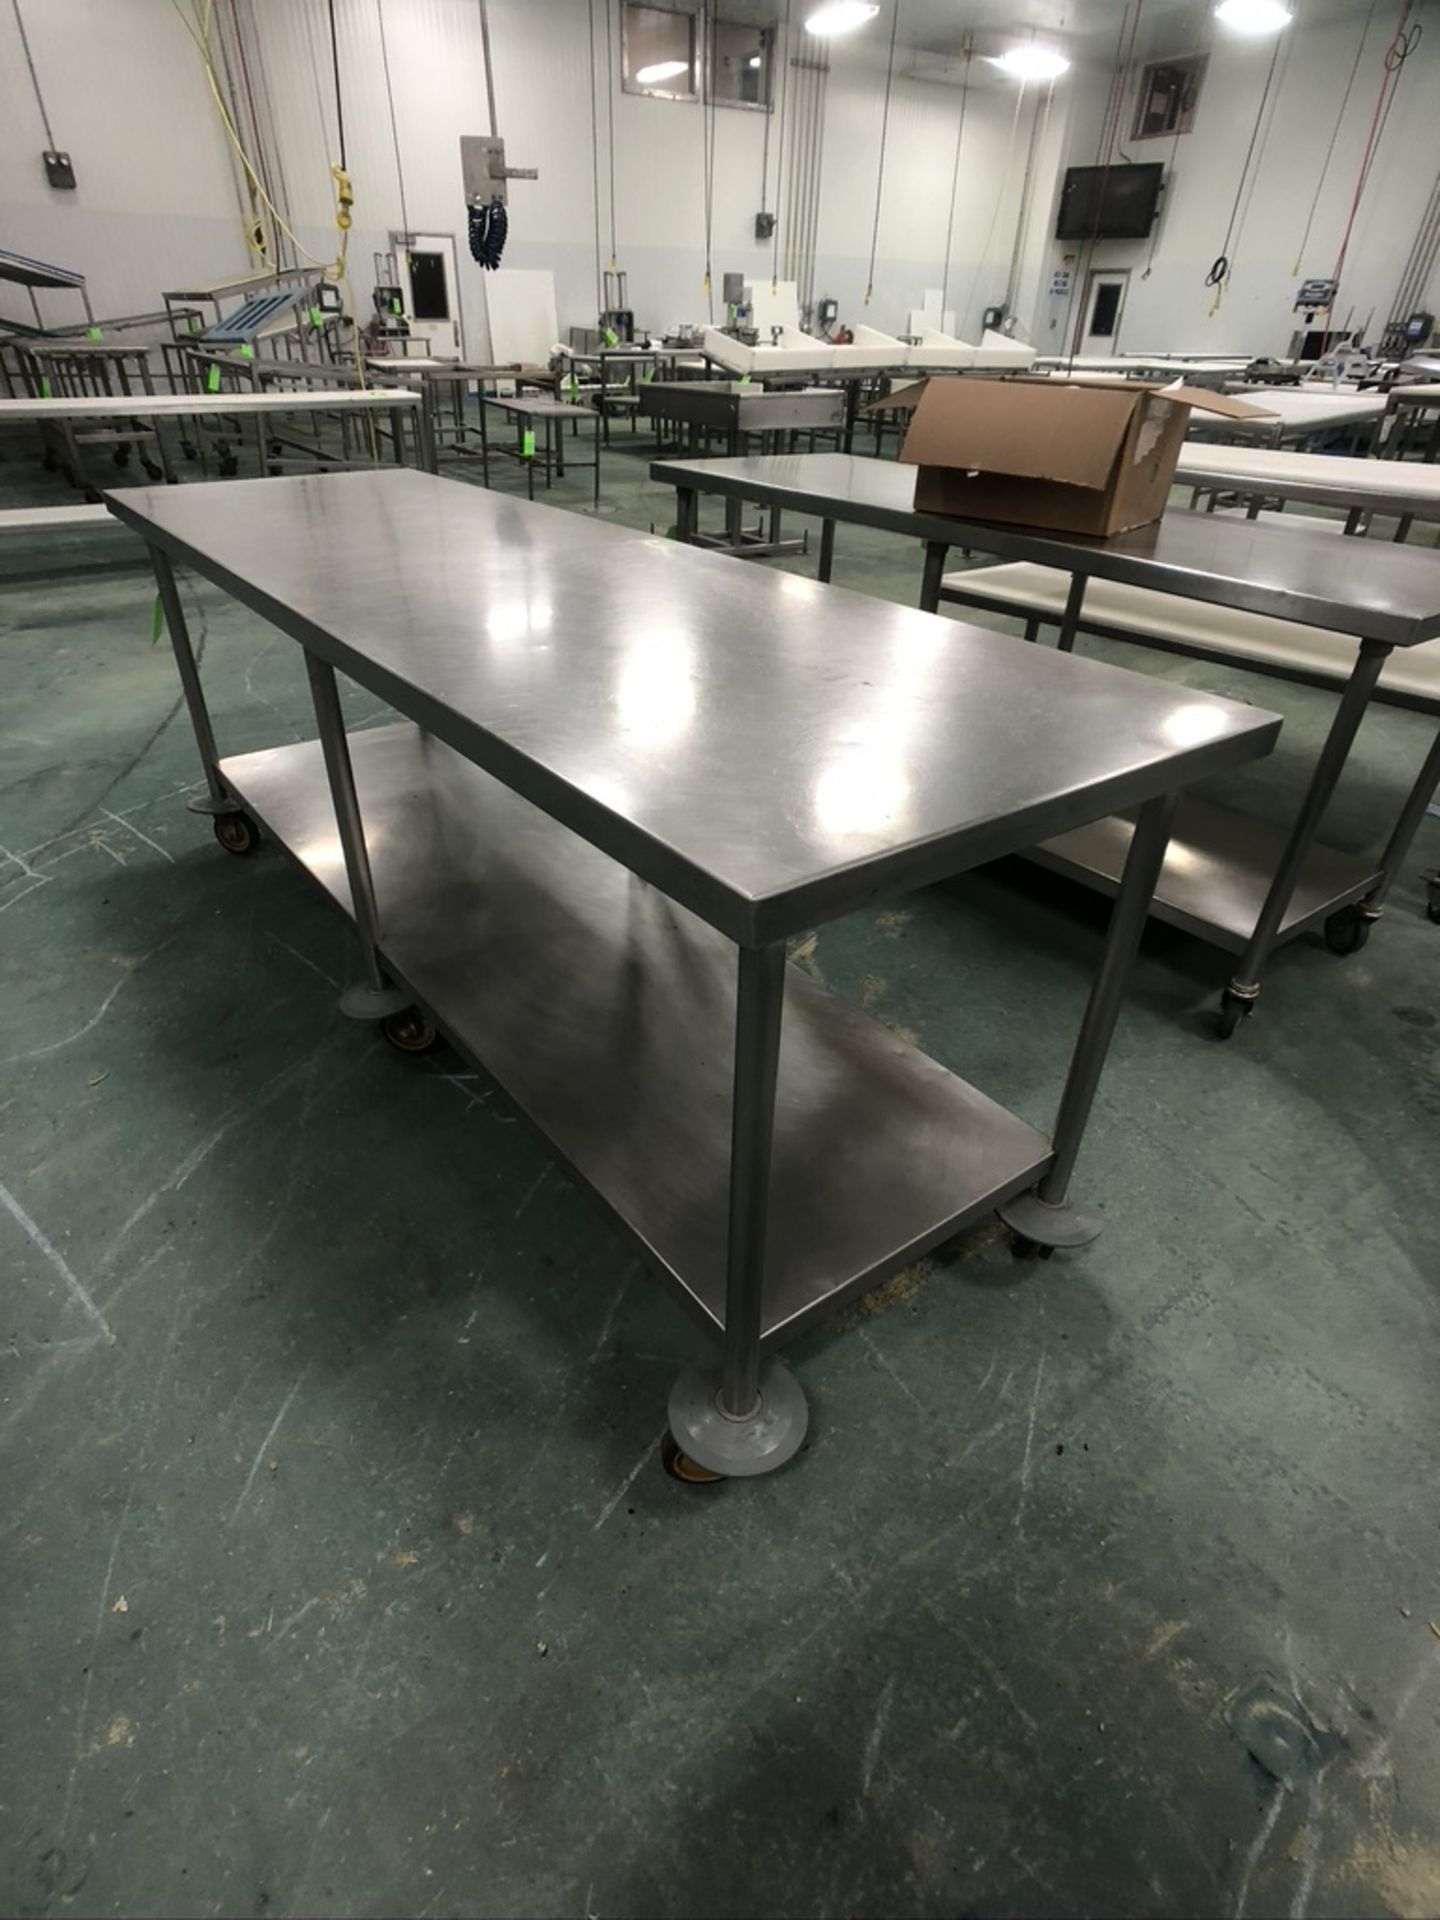 S/S TABLE PORTABLE / MOUNTED ON CASTERS WITH BOTTOM SHELF, APPX DIM. LWH'' 96 X 30 X 36 - Image 3 of 3